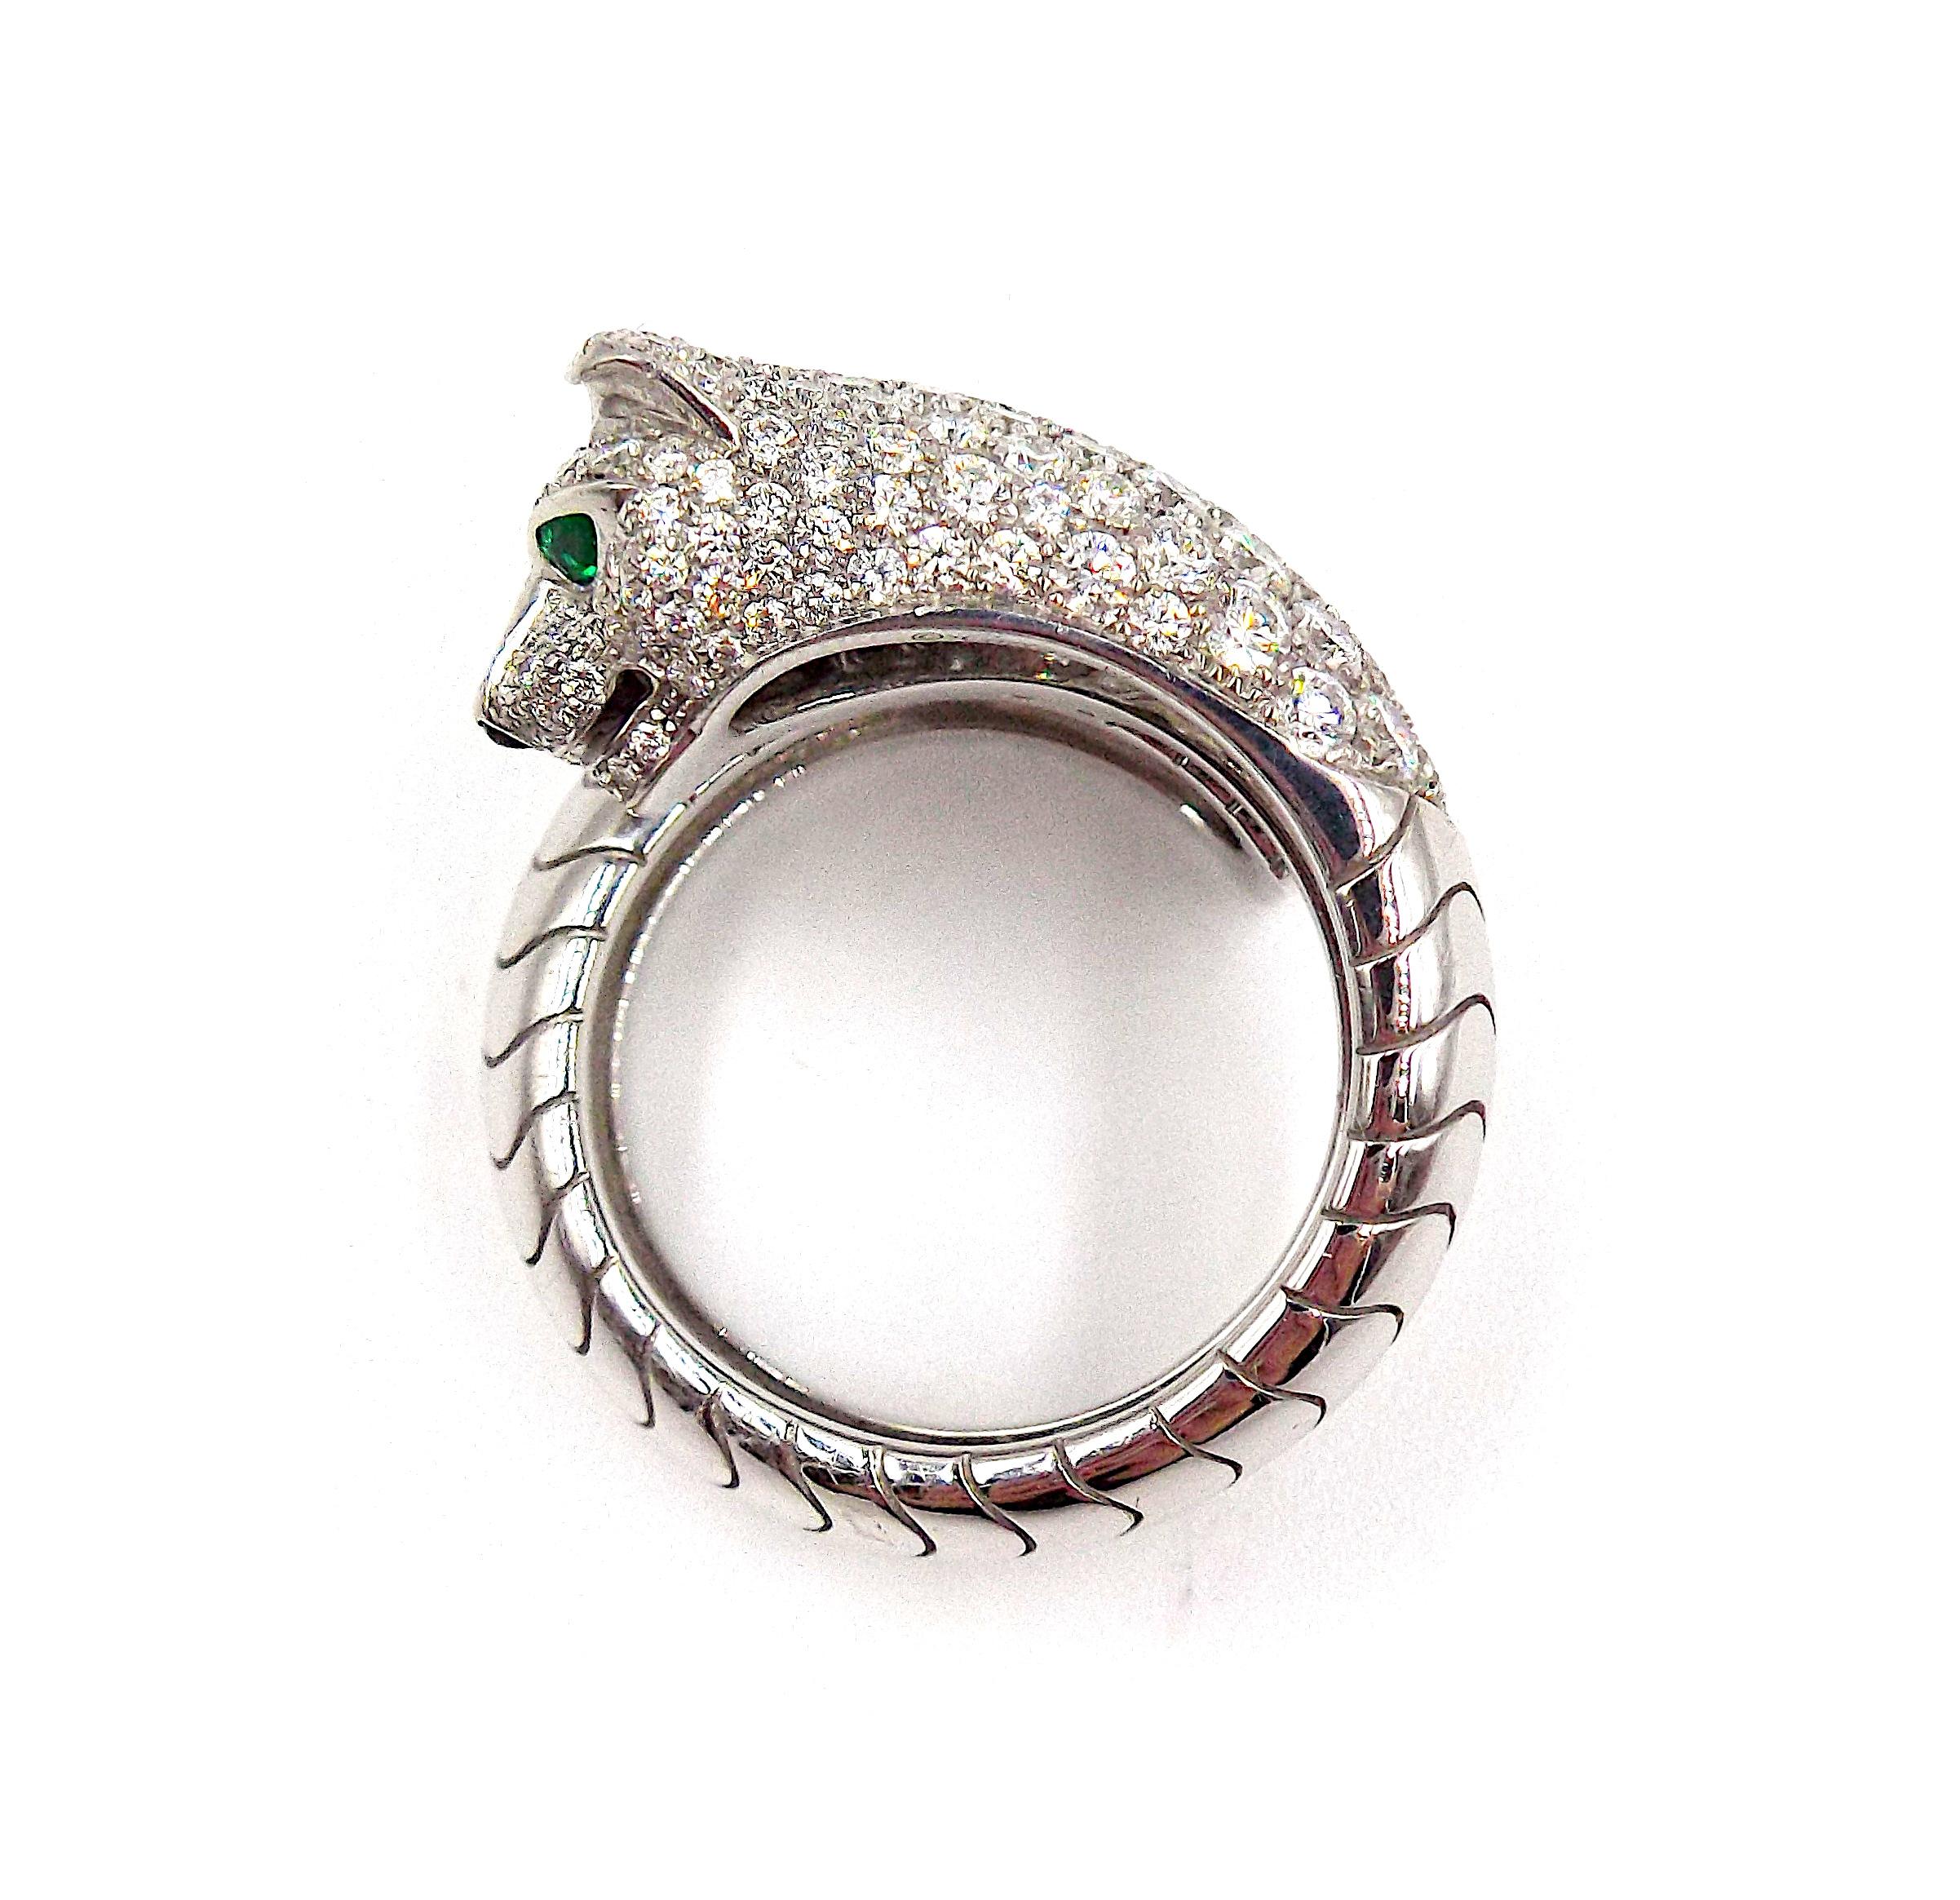 Made of 18k white gold and set with round-cut diamonds. The panther's eyes are accented with tsavorite garnets, the nose is set with black onyx. Comes with a box and papers from Cartier (receipt for cleaning). Size 57 EU, 8 US.
Signed 